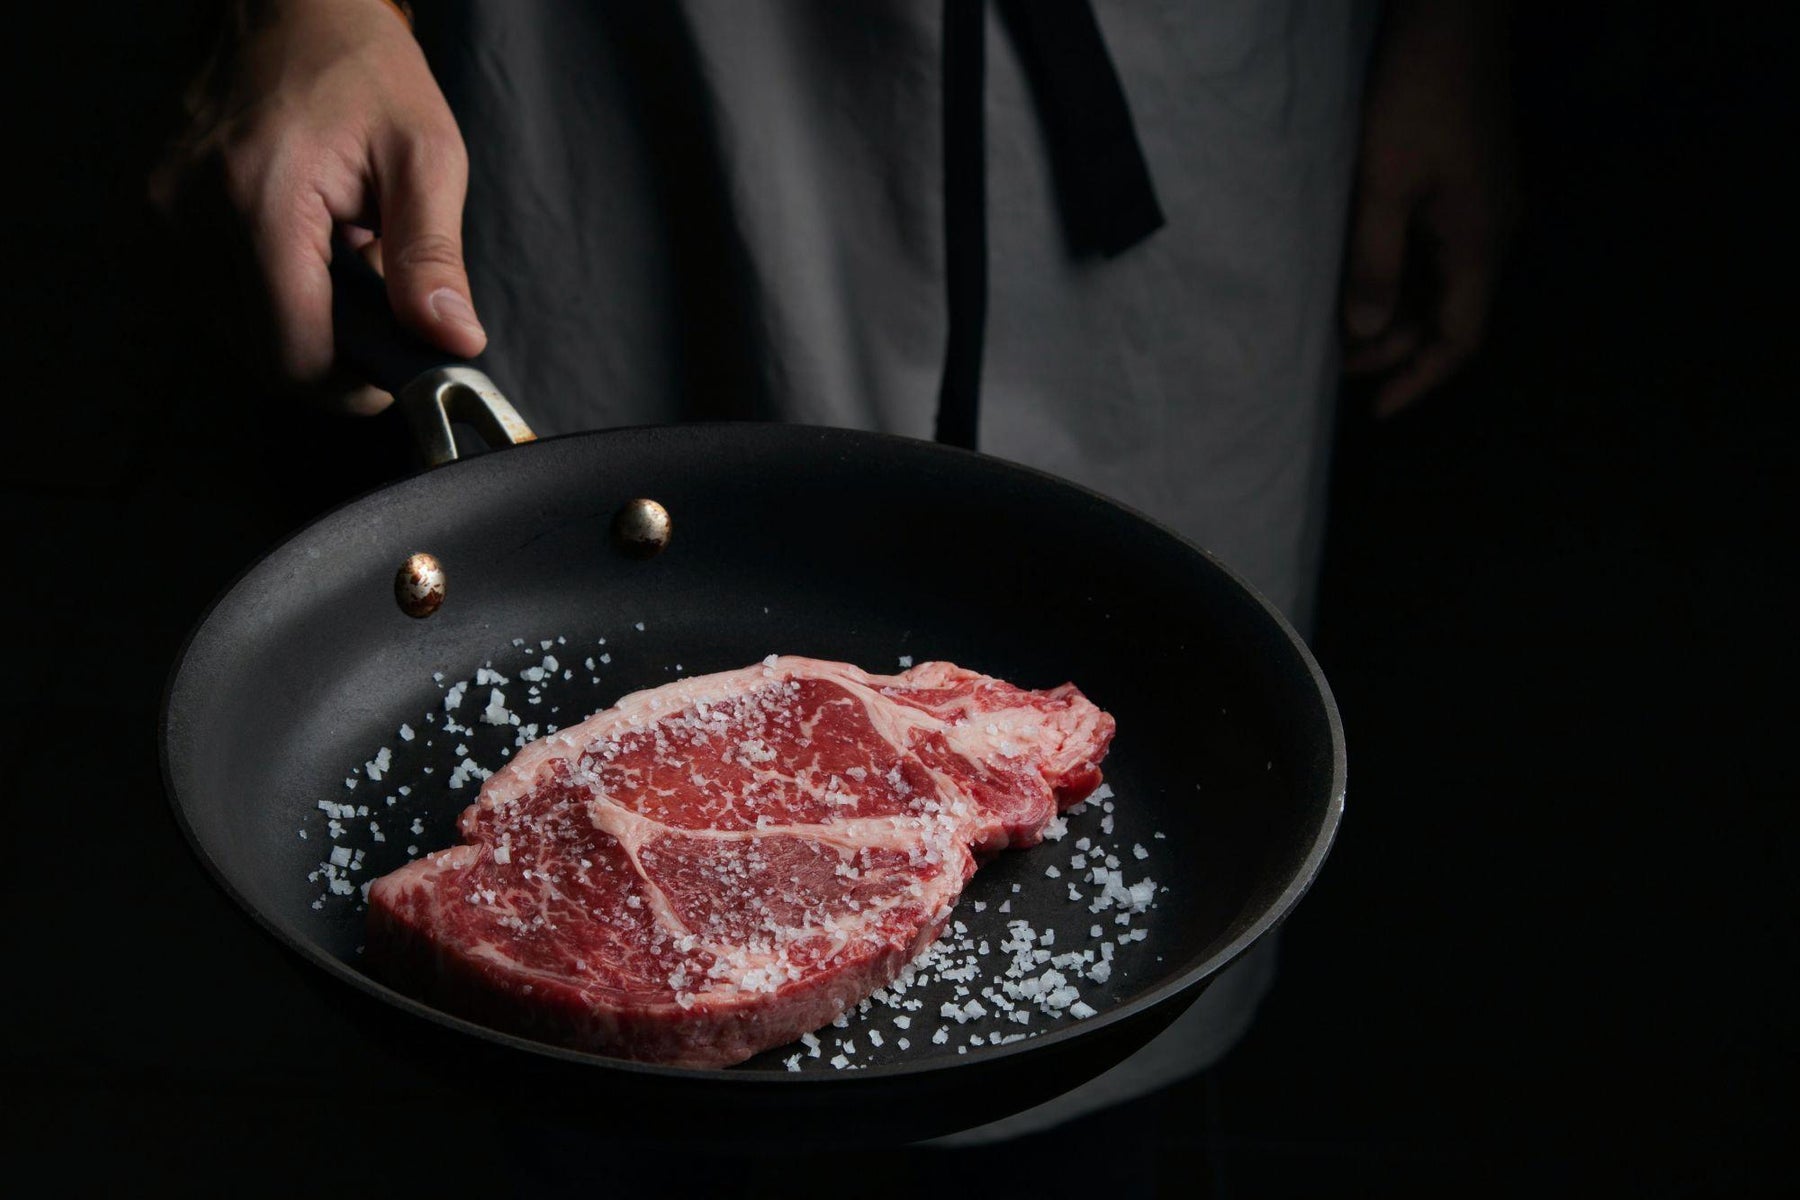 Where To Order: Delicious Steaks To Treat Your Family With - Meat Depot | Buy Quality Meats and Seafood Online